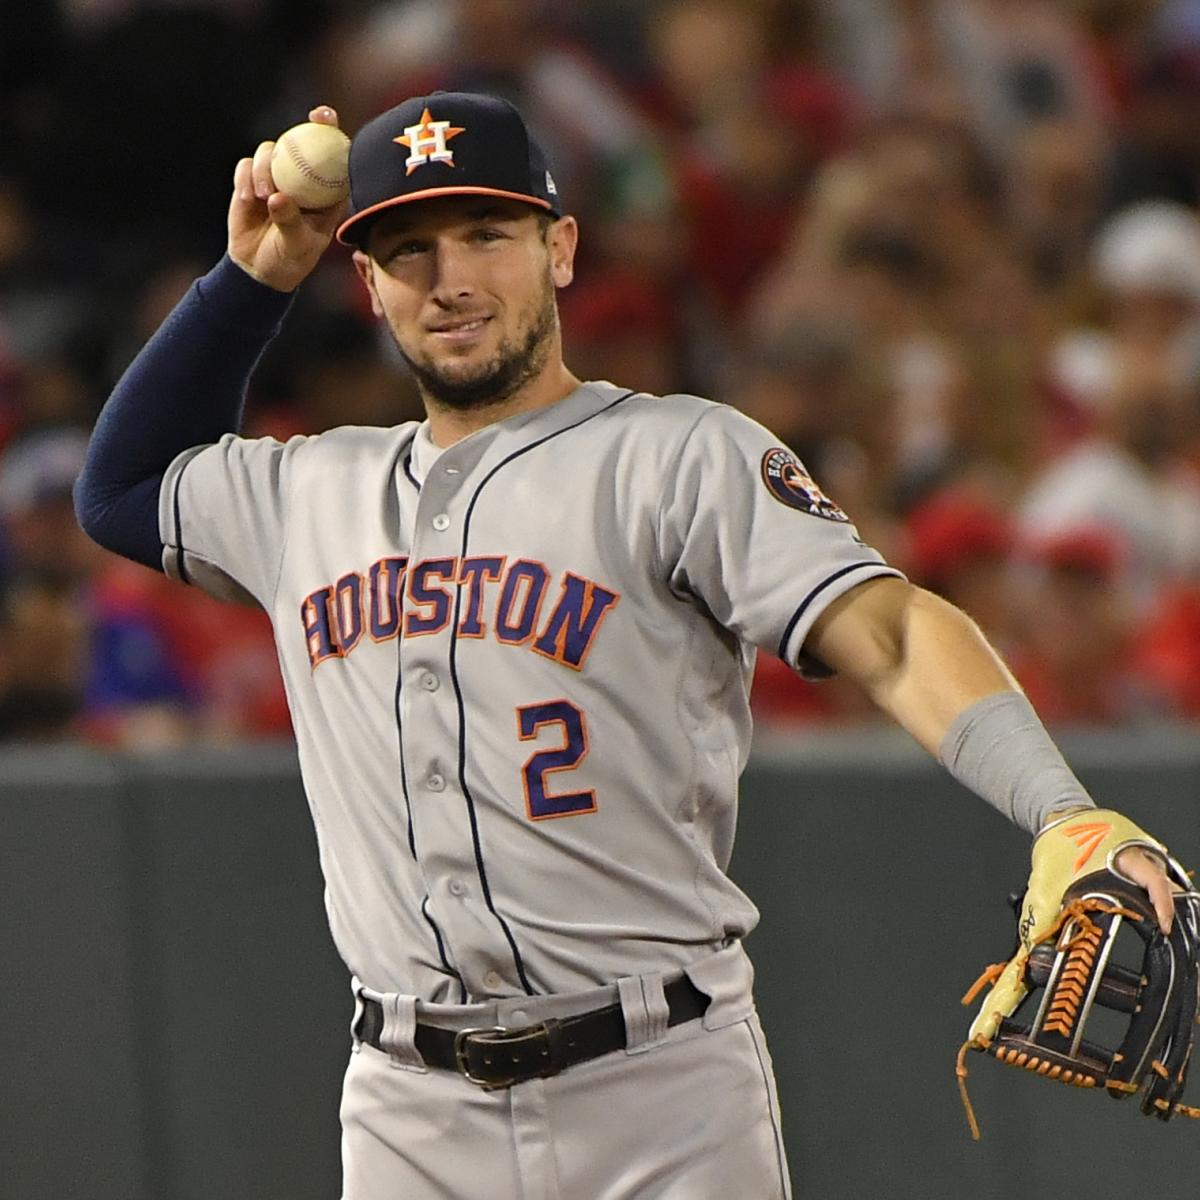 MLB Draft 2013: Complete list of Houston Astros draftees who have